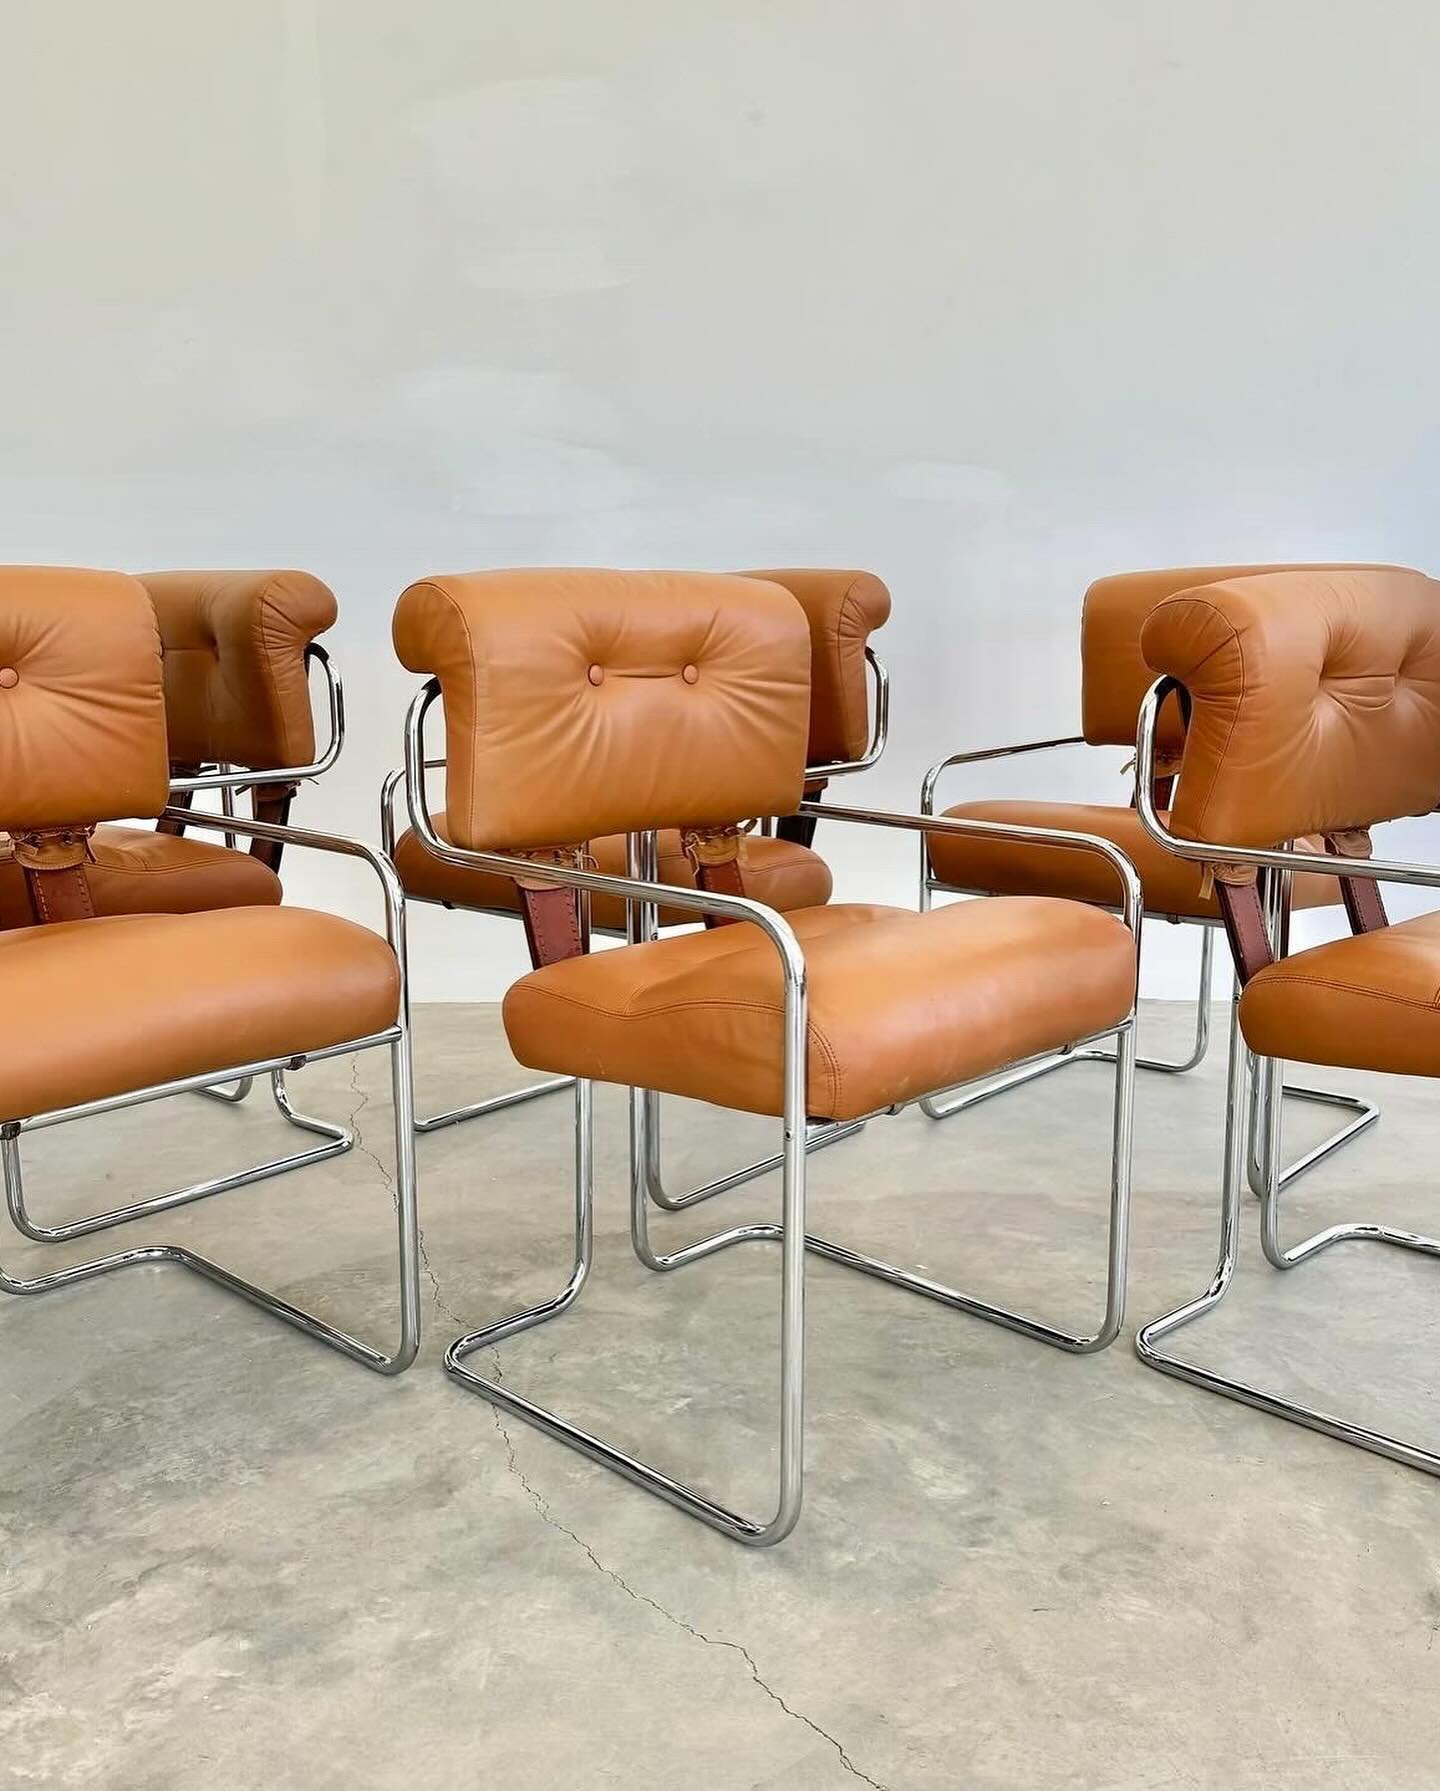 &lsquo;Tucroma&rsquo; chairs by Guido Faleschini, 1970s Italy 🥃